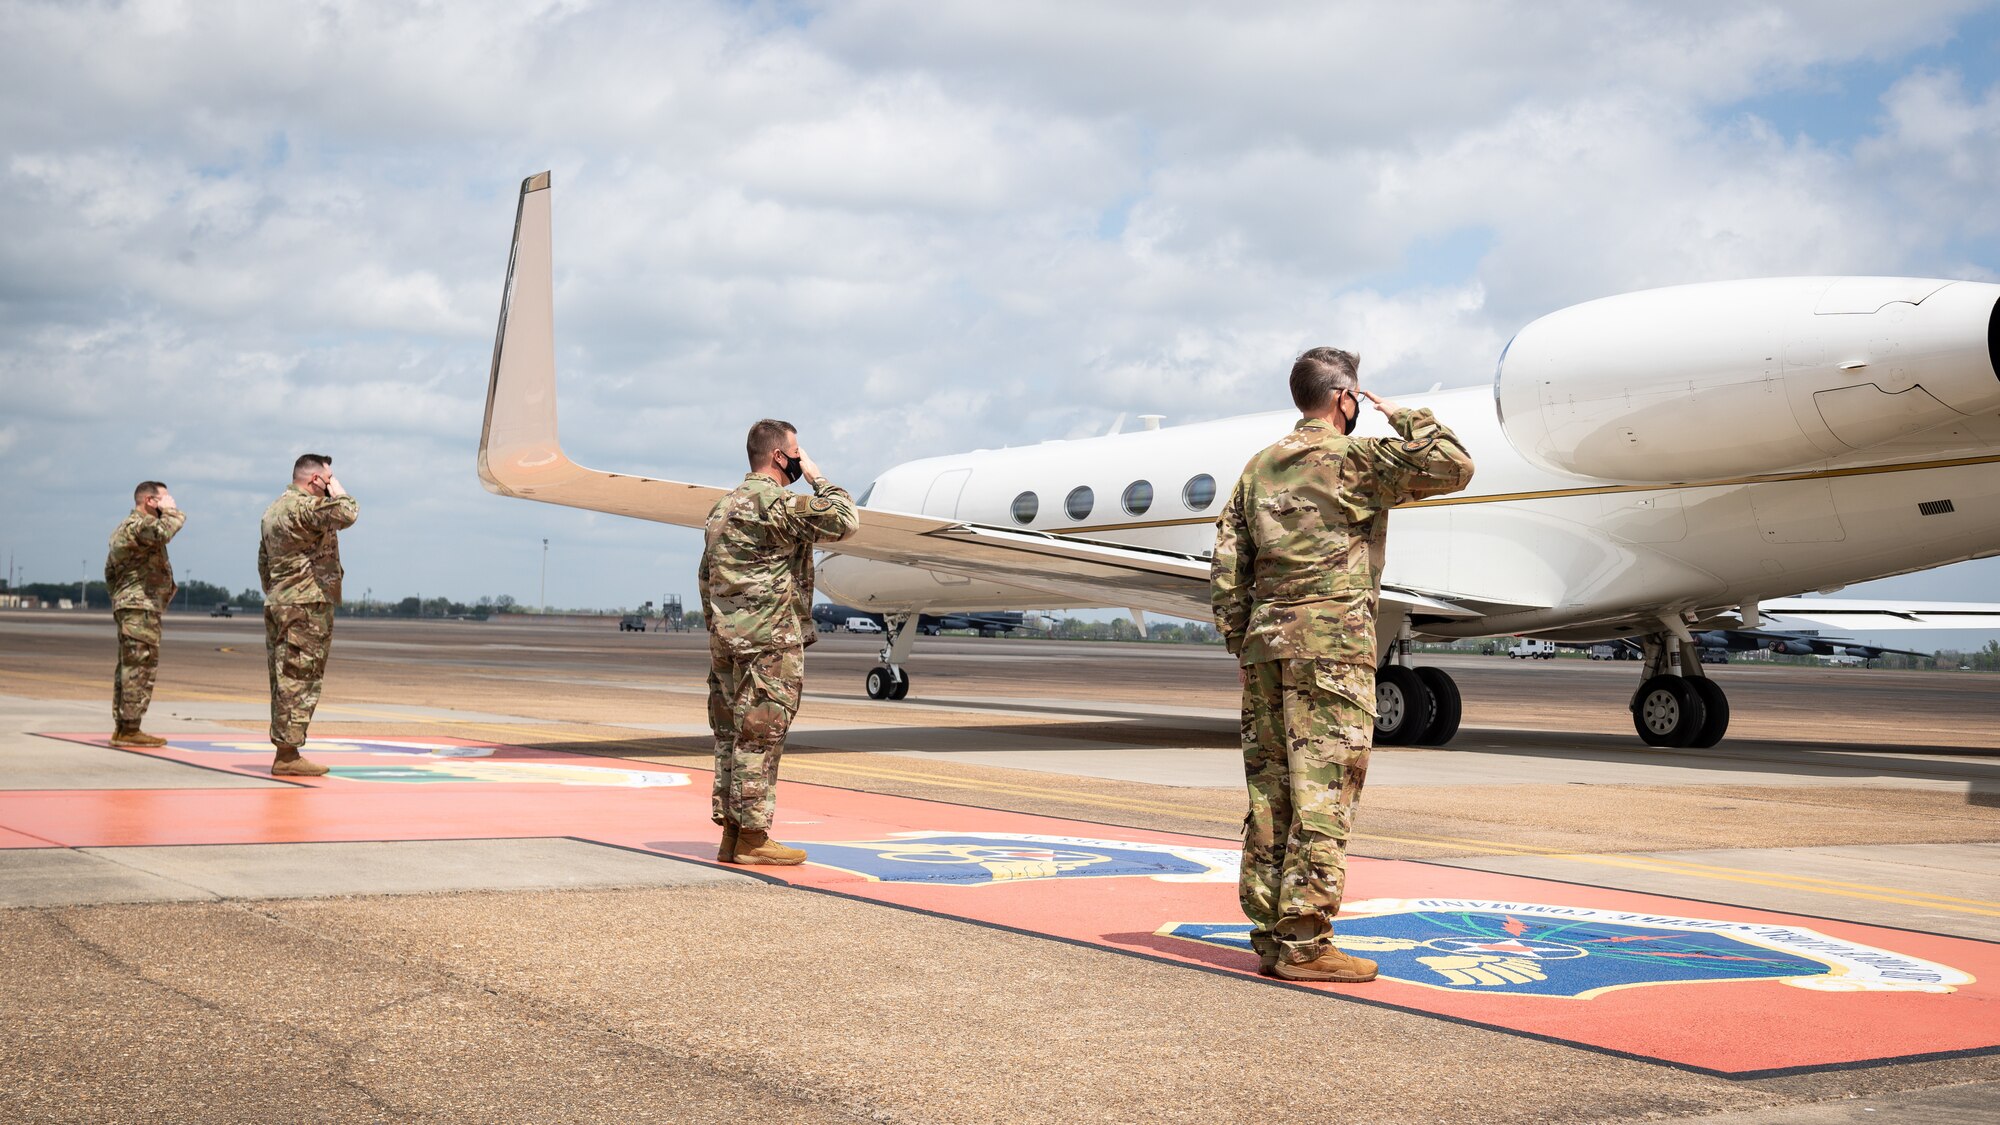 Leaders from the 2nd Bomb Wing and Air Force Global Strike Command salute the departure of Honorable John P. Roth, acting Secretary of the Air Force, at Barksdale Air Force Base, Louisiana, April 6, 2021.